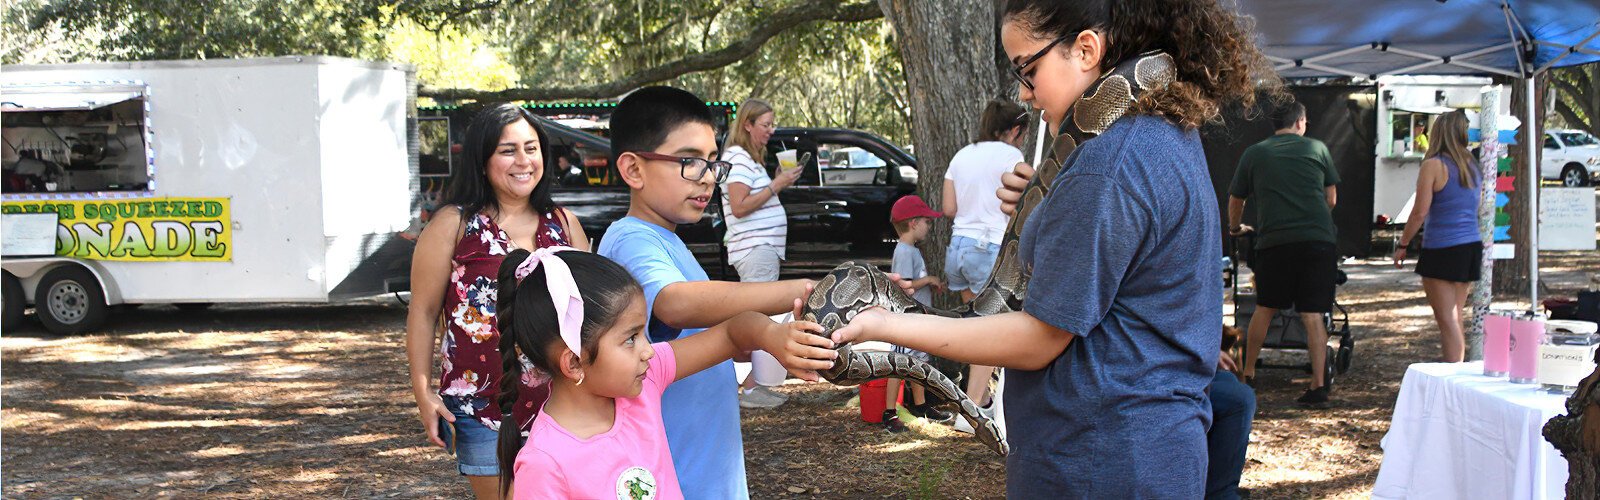 Volunteering with Roos & Coos Farm, Sara, 13, encourages young visitors to pet Bagheera, a mellow 18-year-old ball python, at the Wonders of Wildlife Festival at Edward Medard Conservation Park in Plant City.